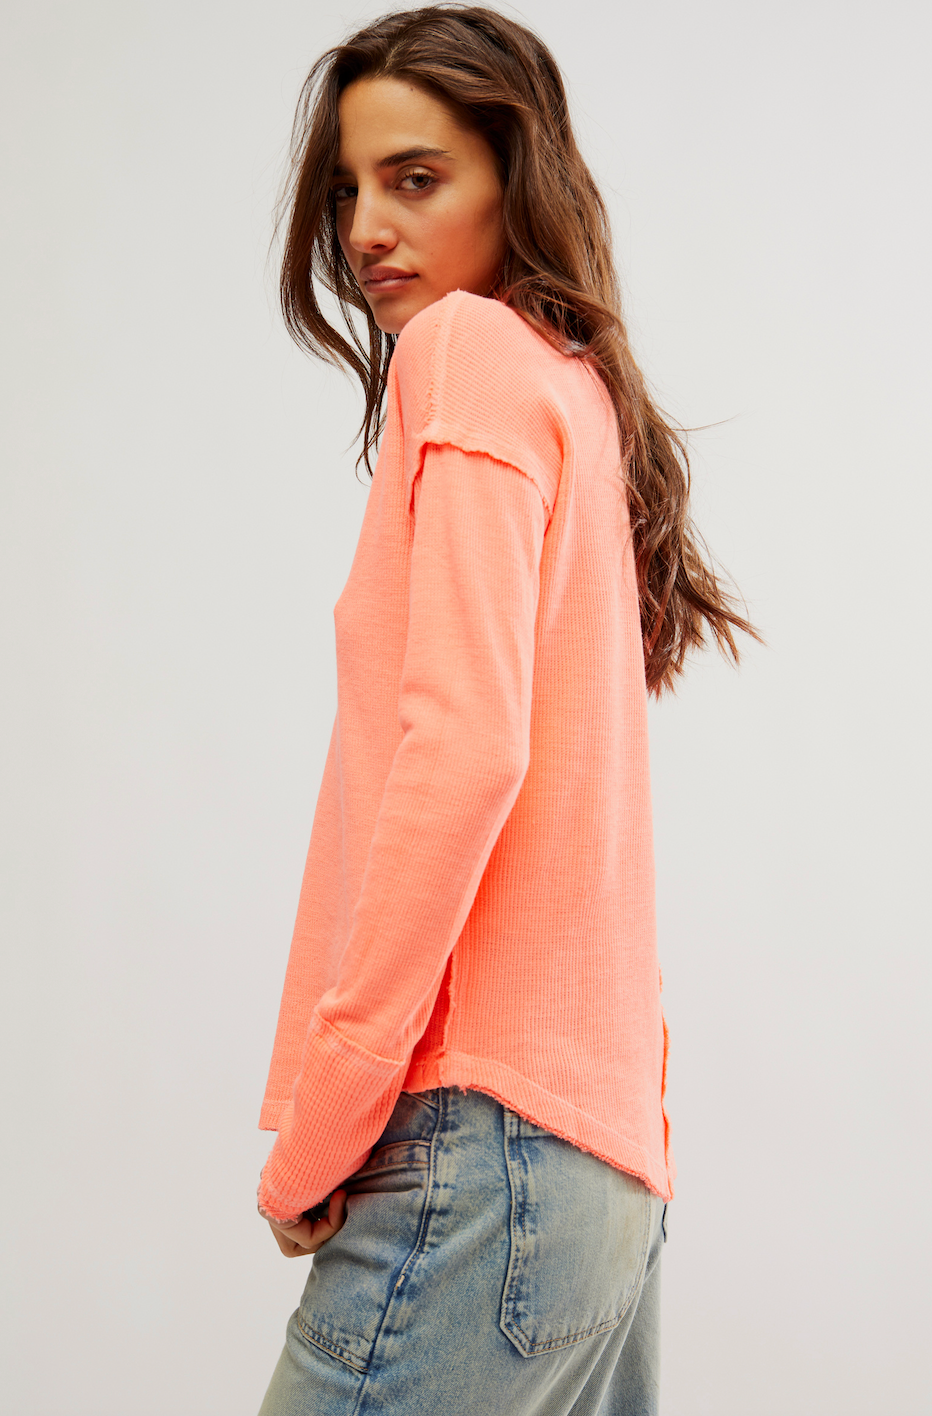 FREE PEOPLE SAIL AWAY LONG SLEEVE SOLID TOP IN FLUORESCENT CORAL